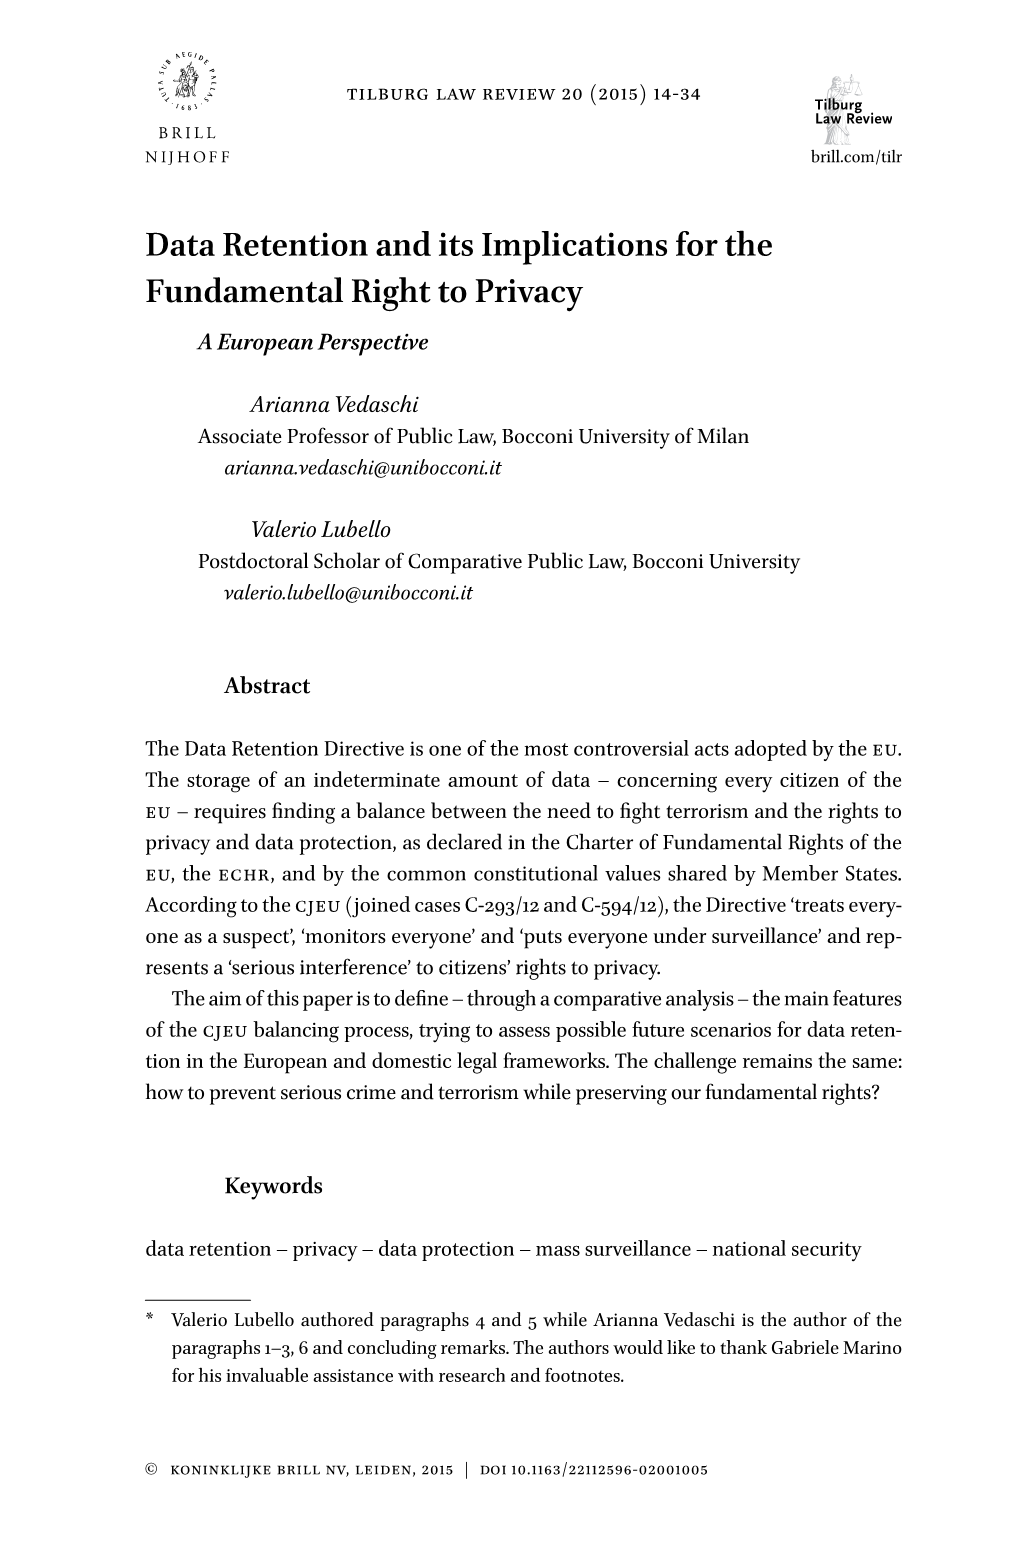 Data Retention and Its Implications for the Fundamental Right to Privacy a European Perspective